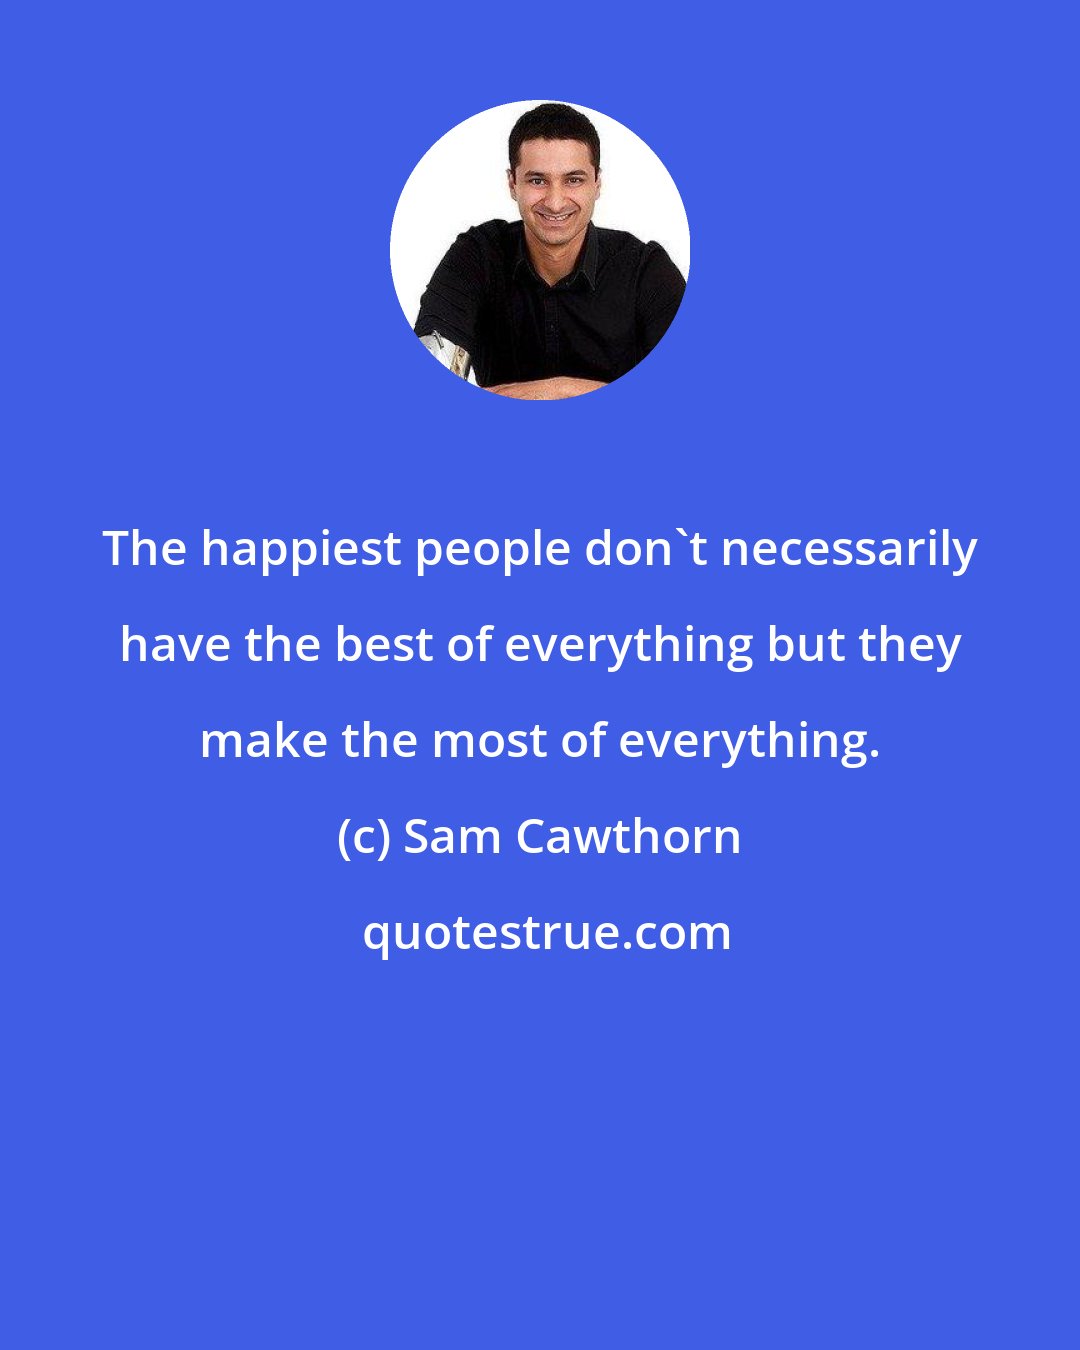 Sam Cawthorn: The happiest people don't necessarily have the best of everything but they make the most of everything.